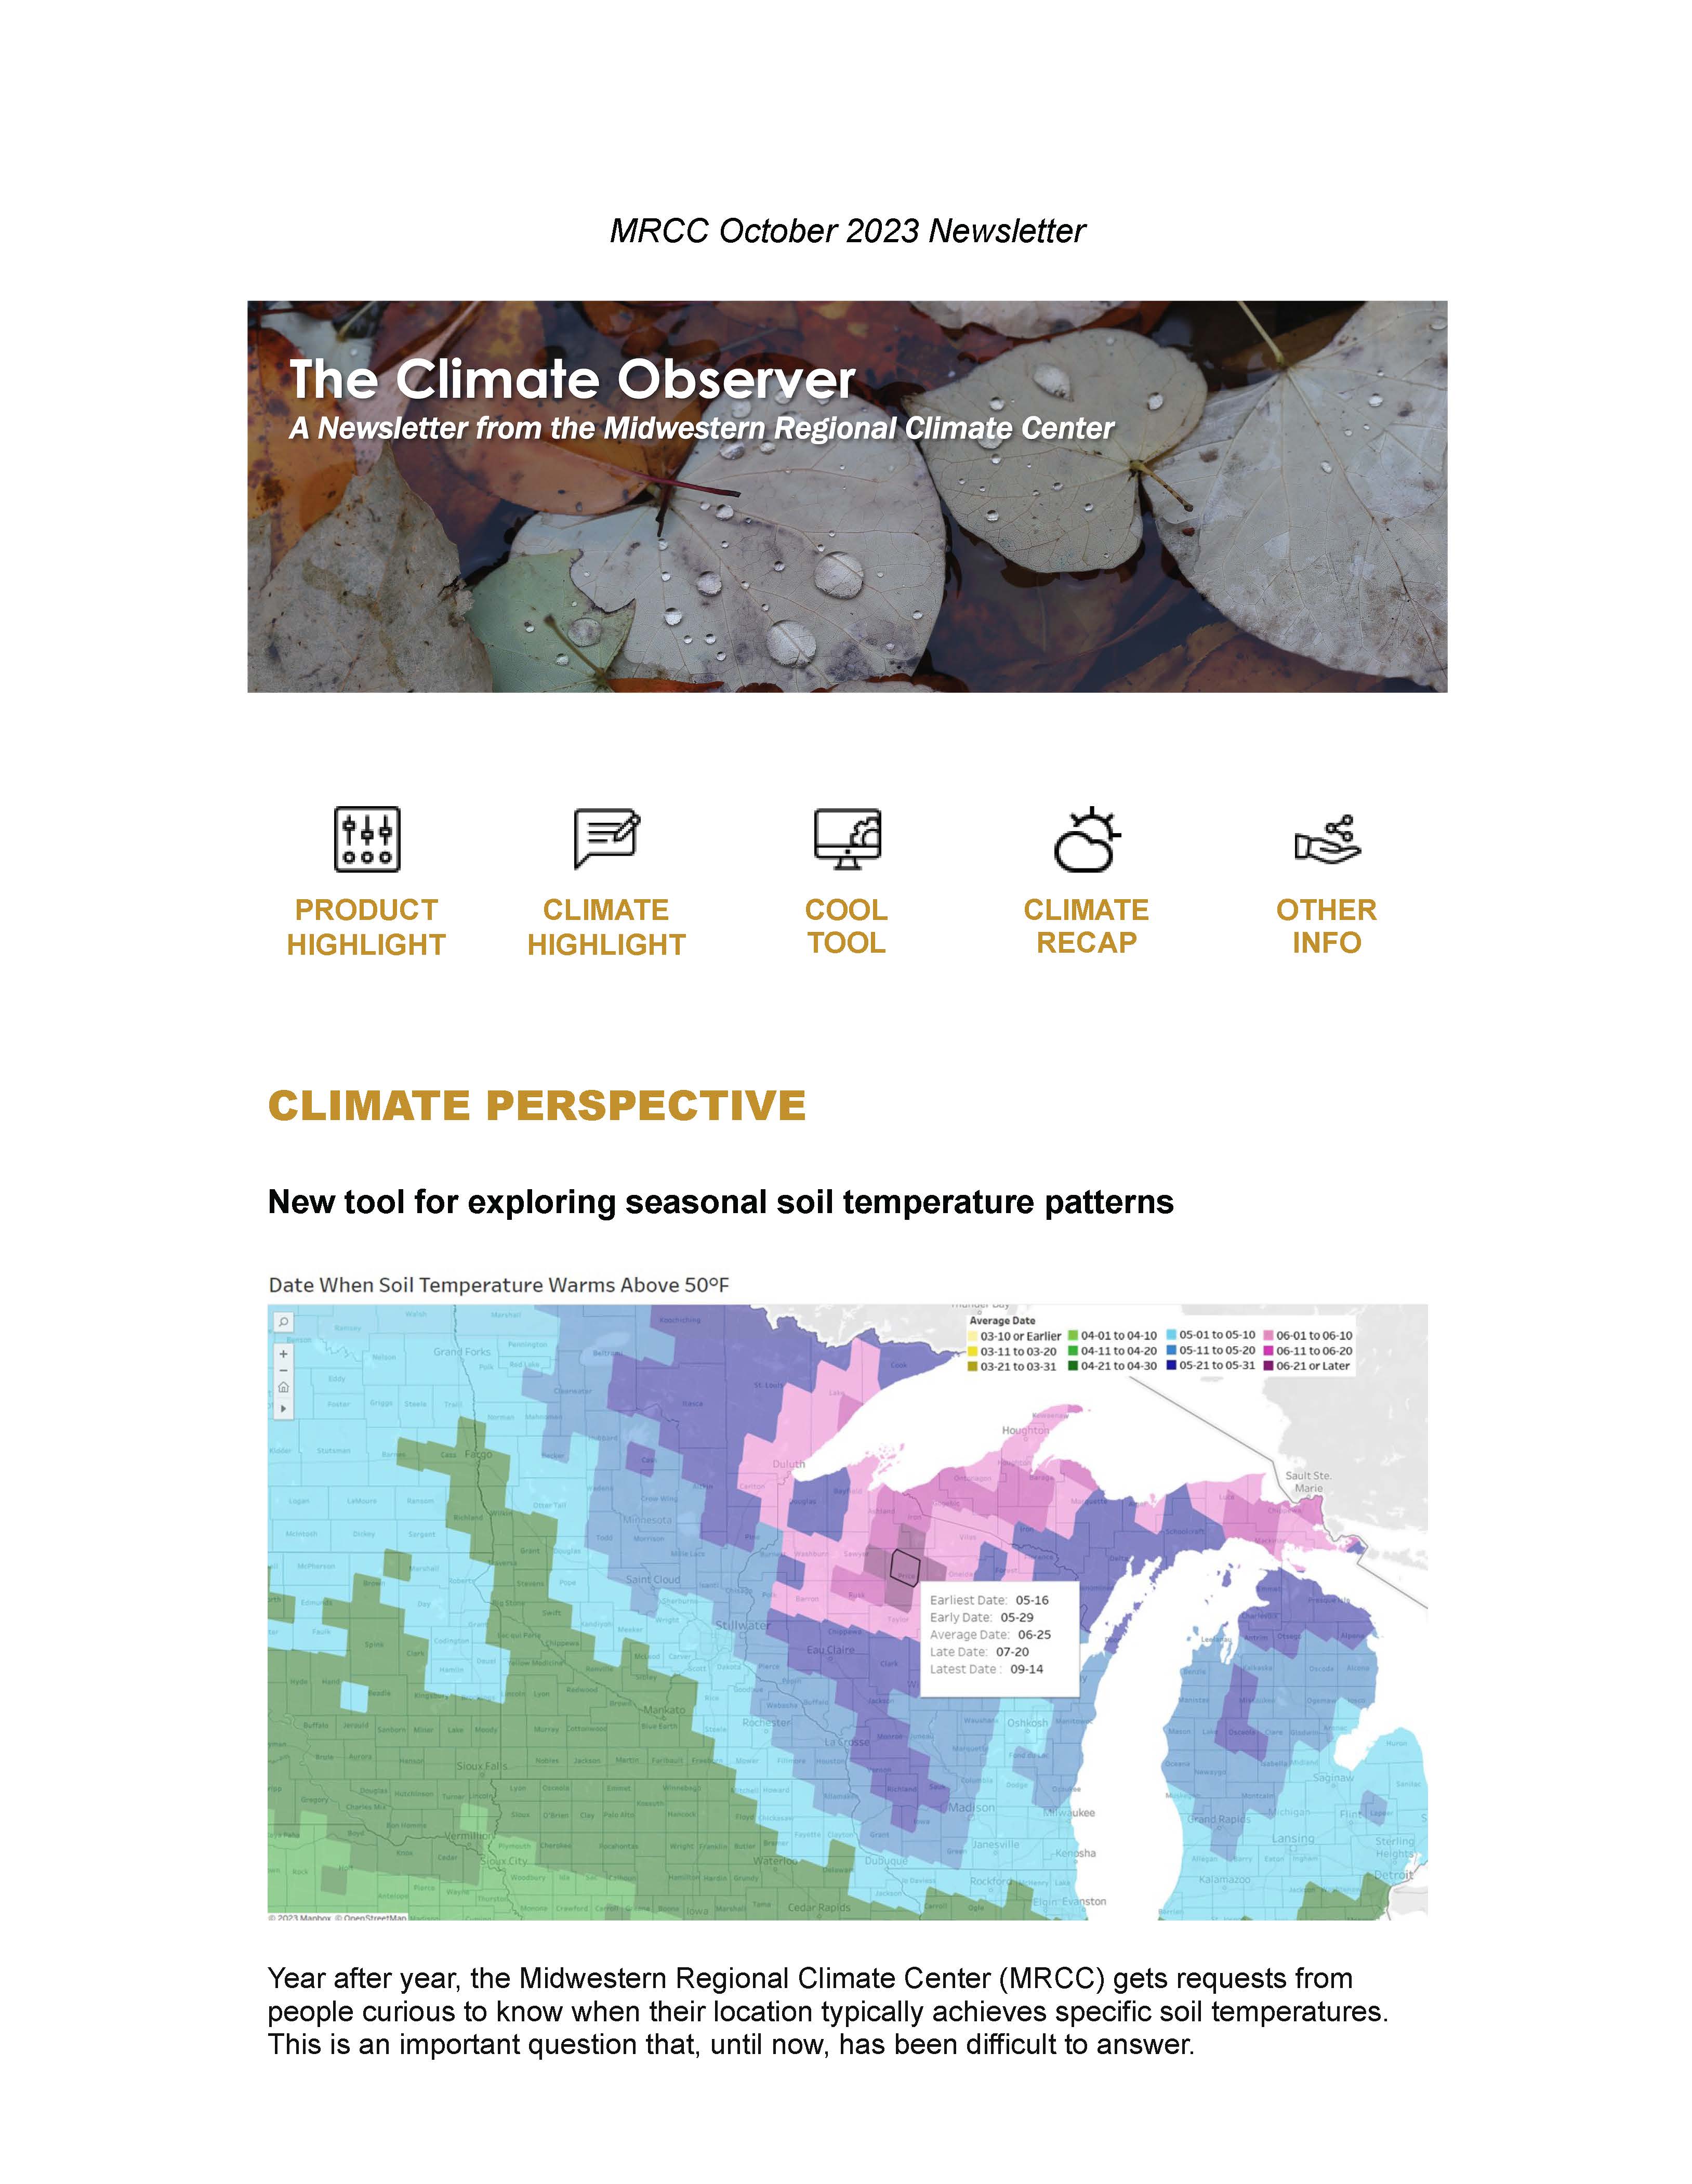 October 2023 "The Climate Observer"